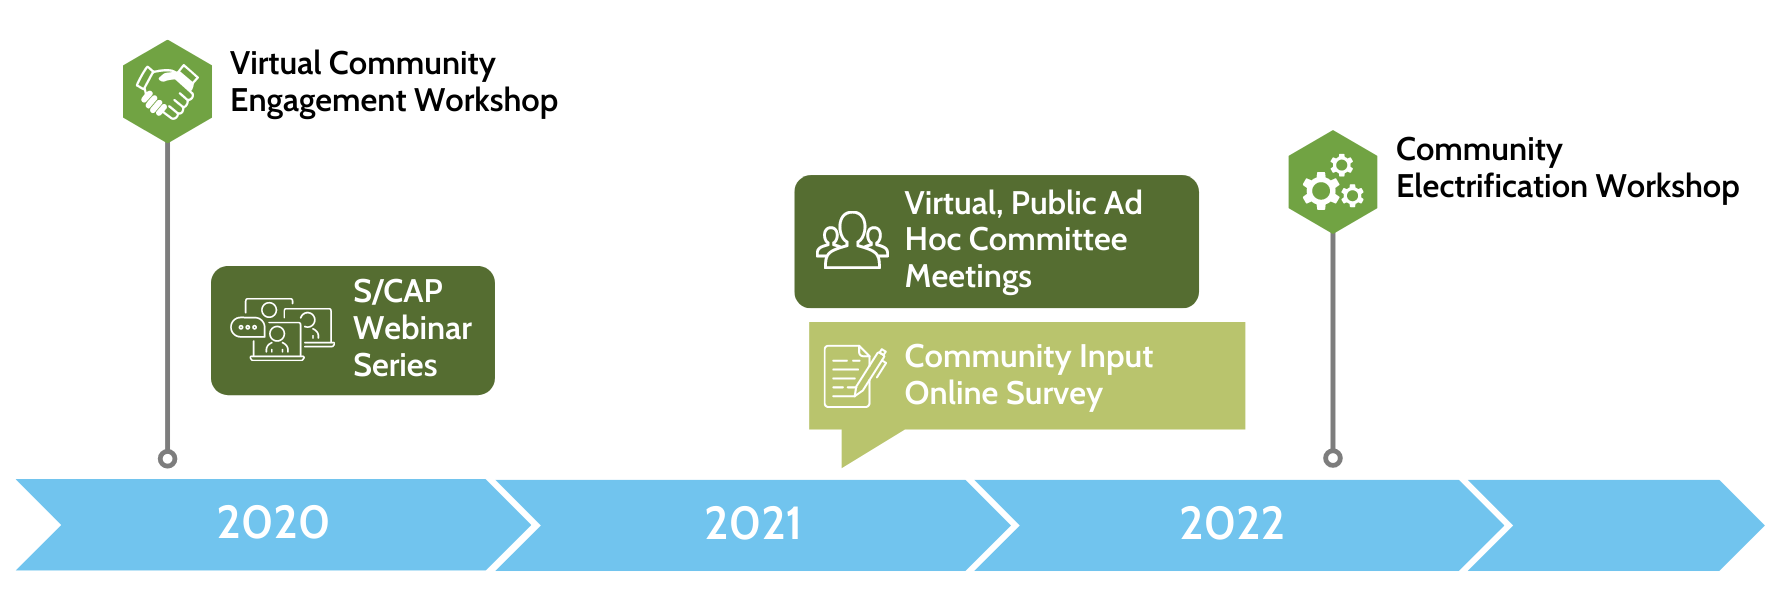 Outreach timeline from 2020 through 2022